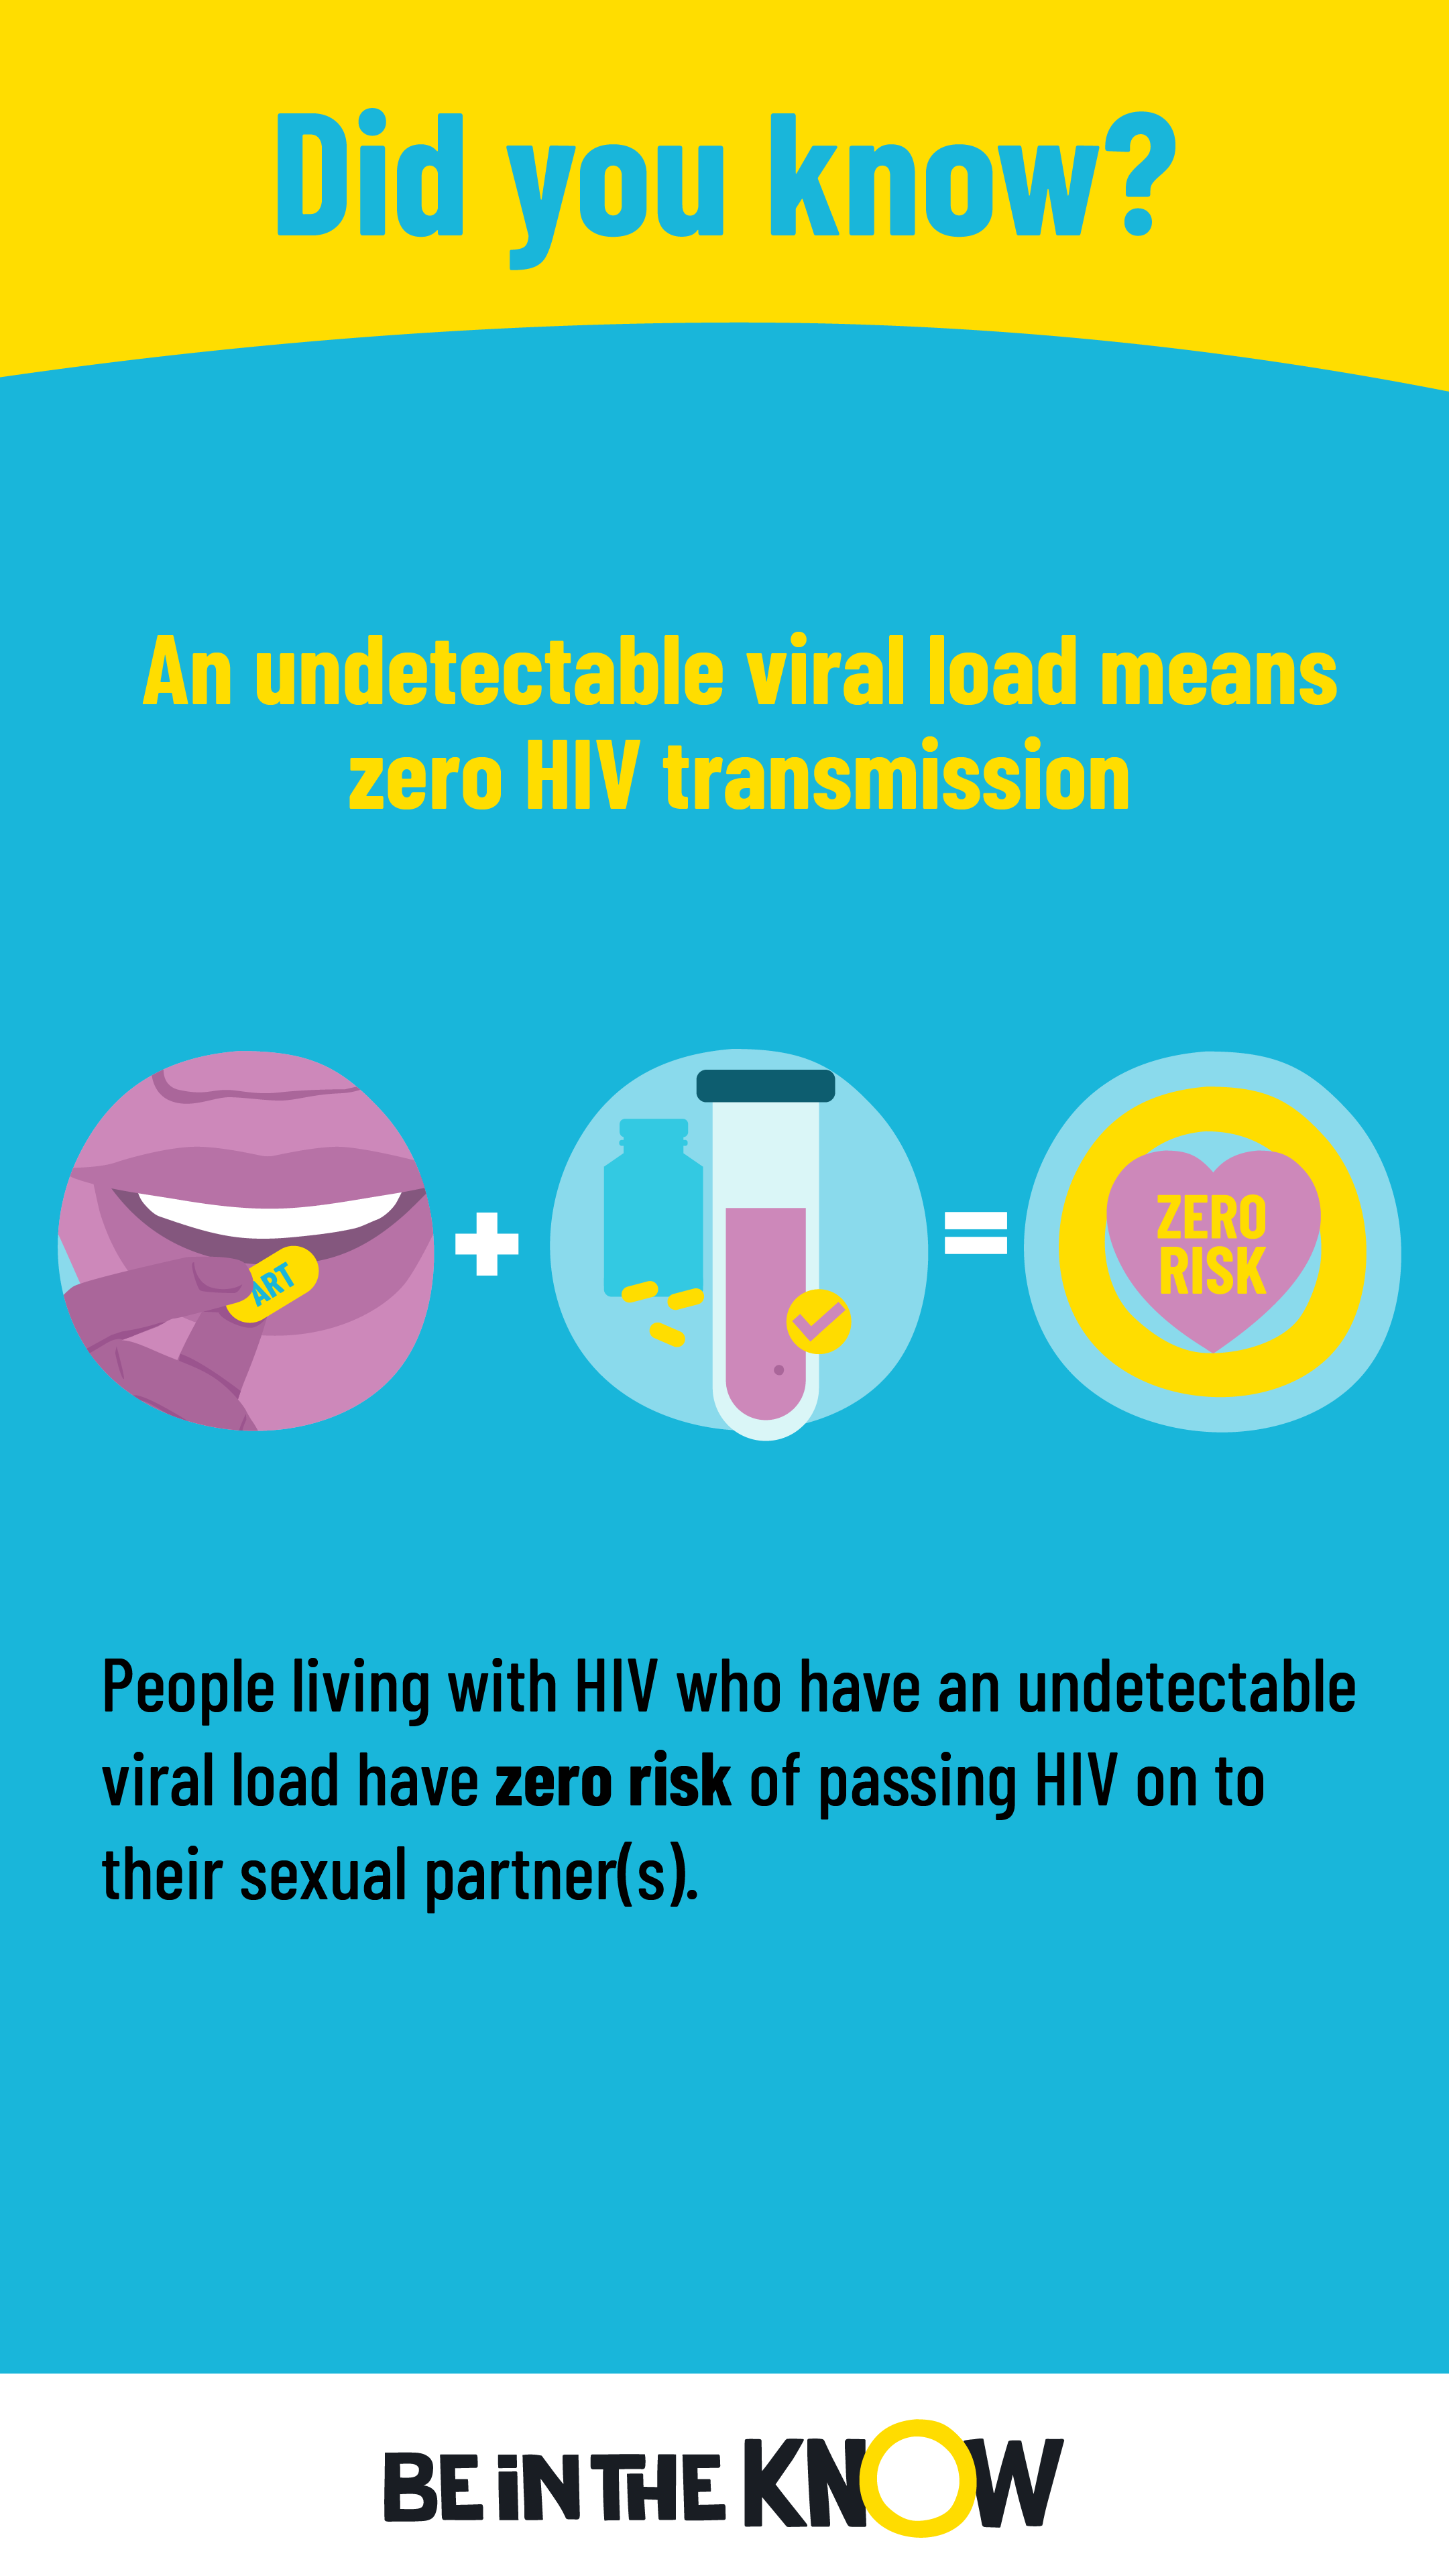 An undetectable viral load means zero HIV transmission